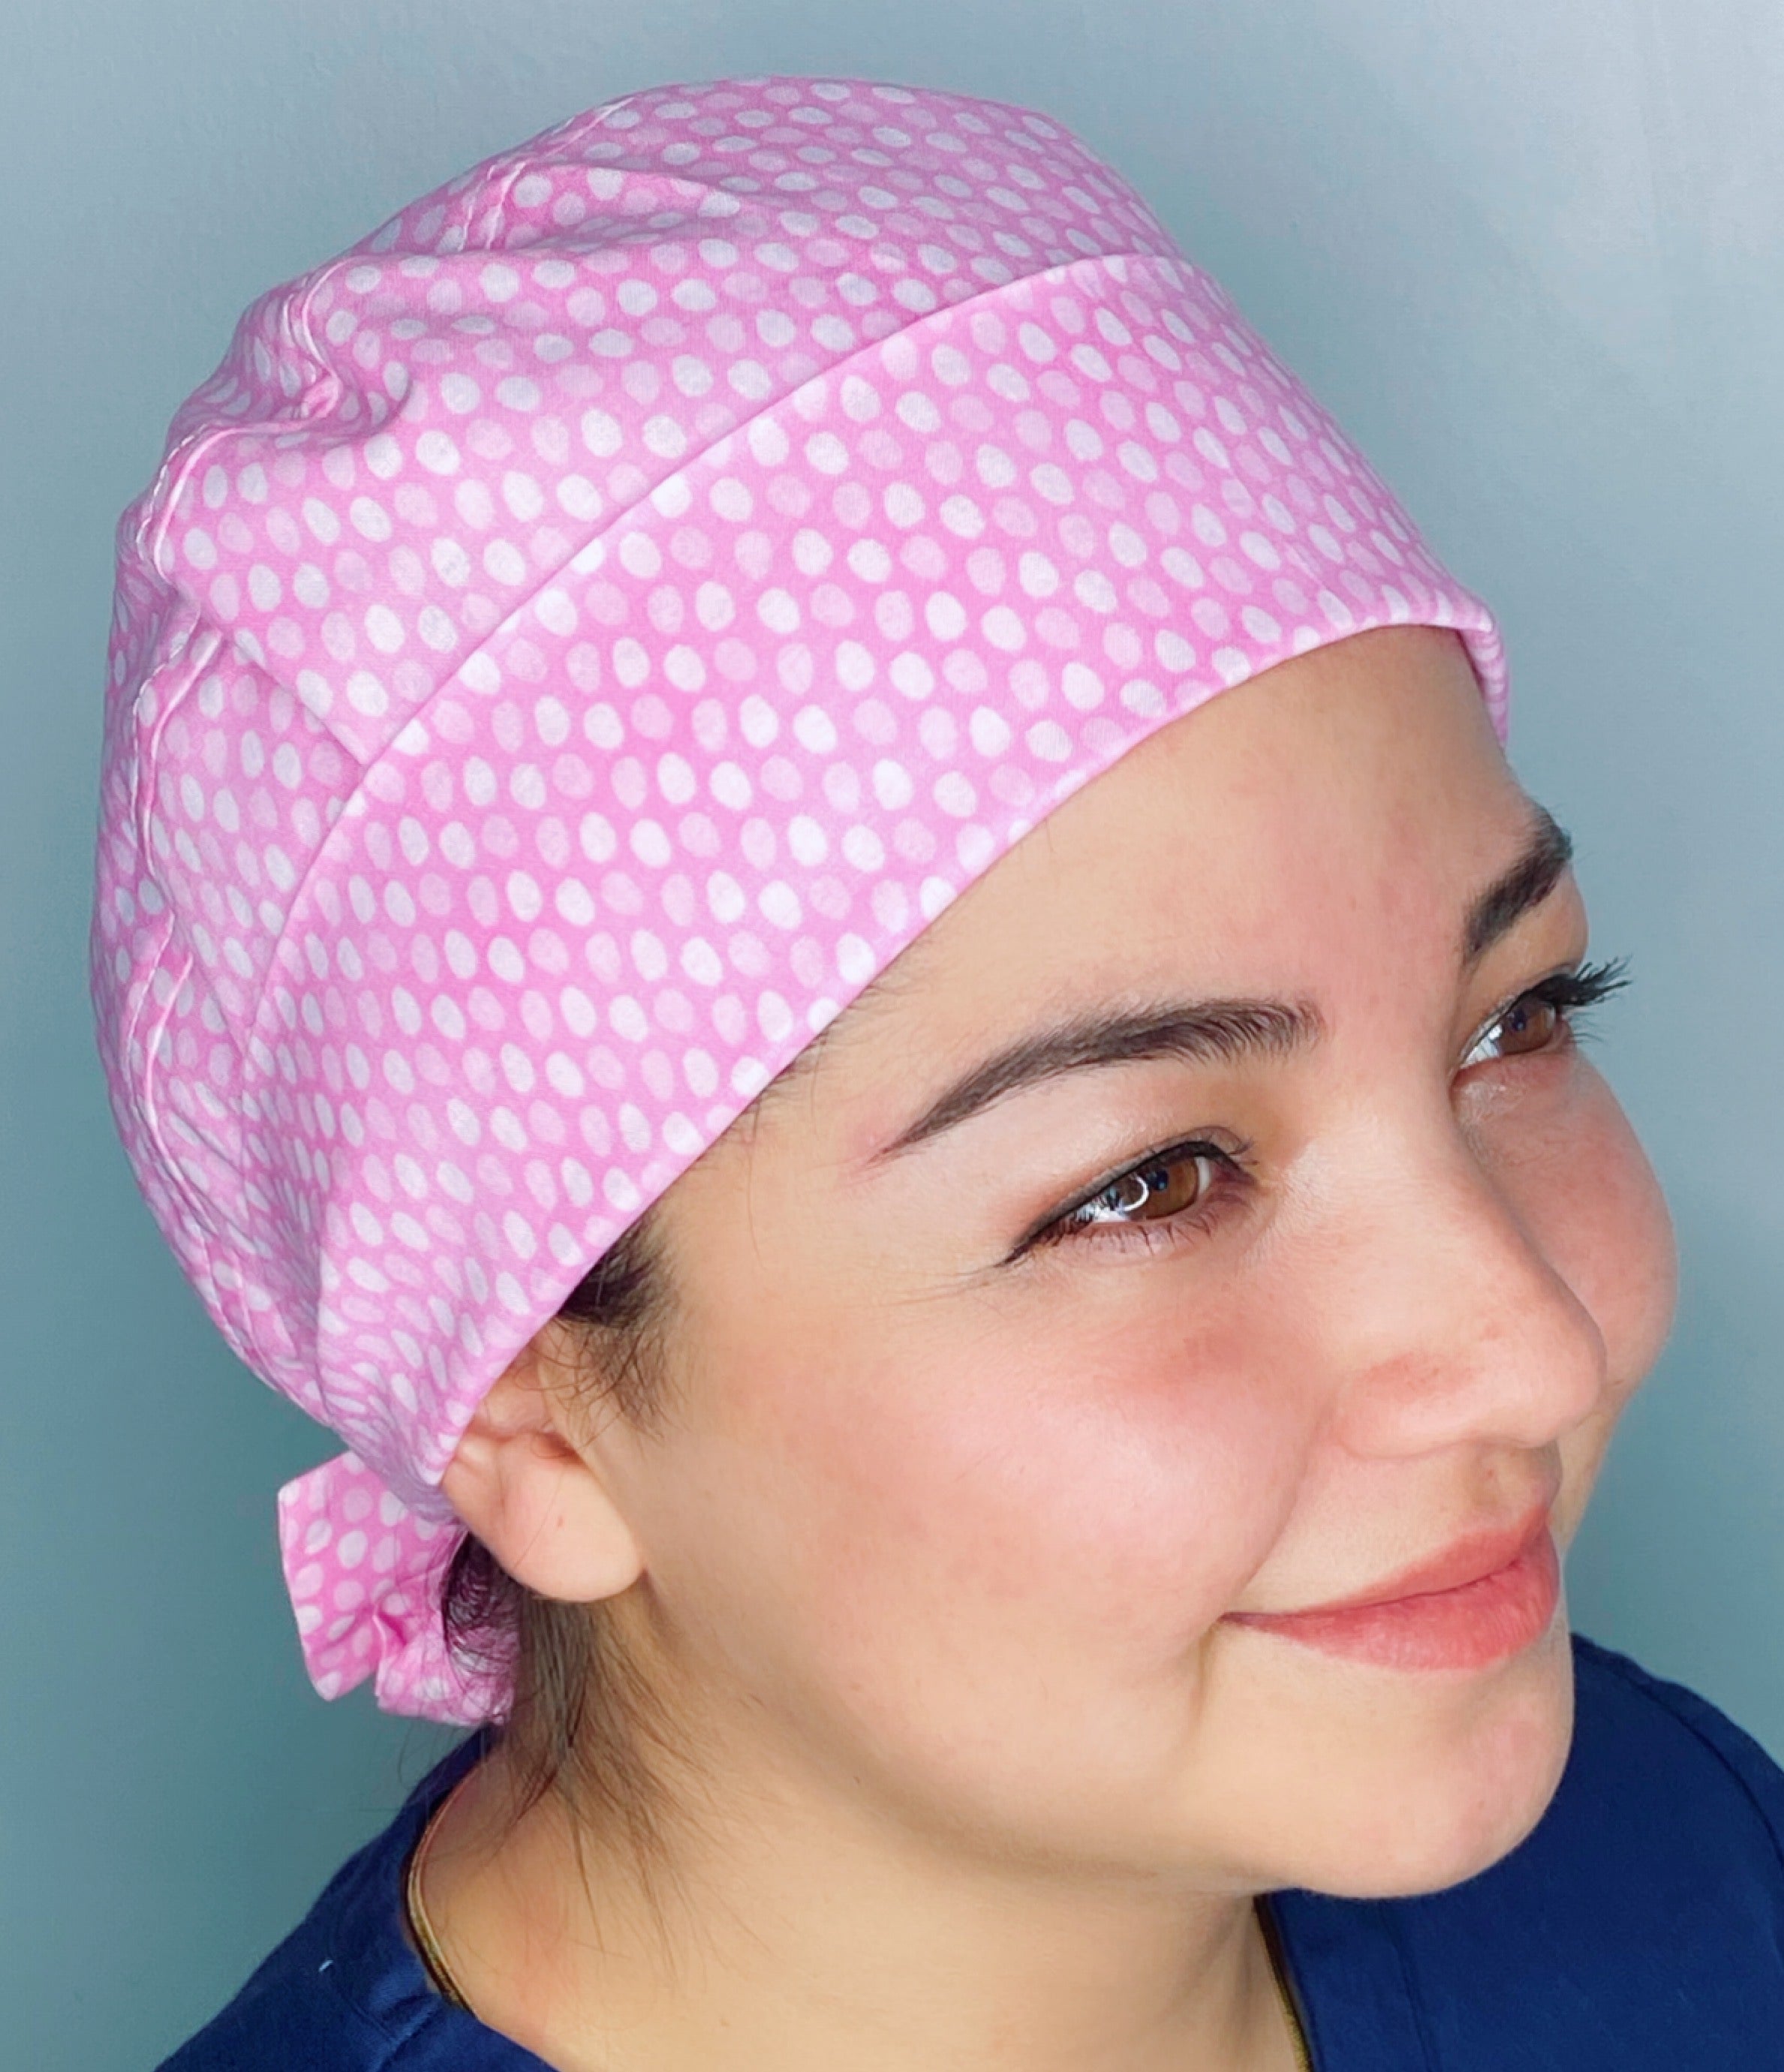 Polka Dots on Pink Ombre Pattern Fancy Themed Pixie